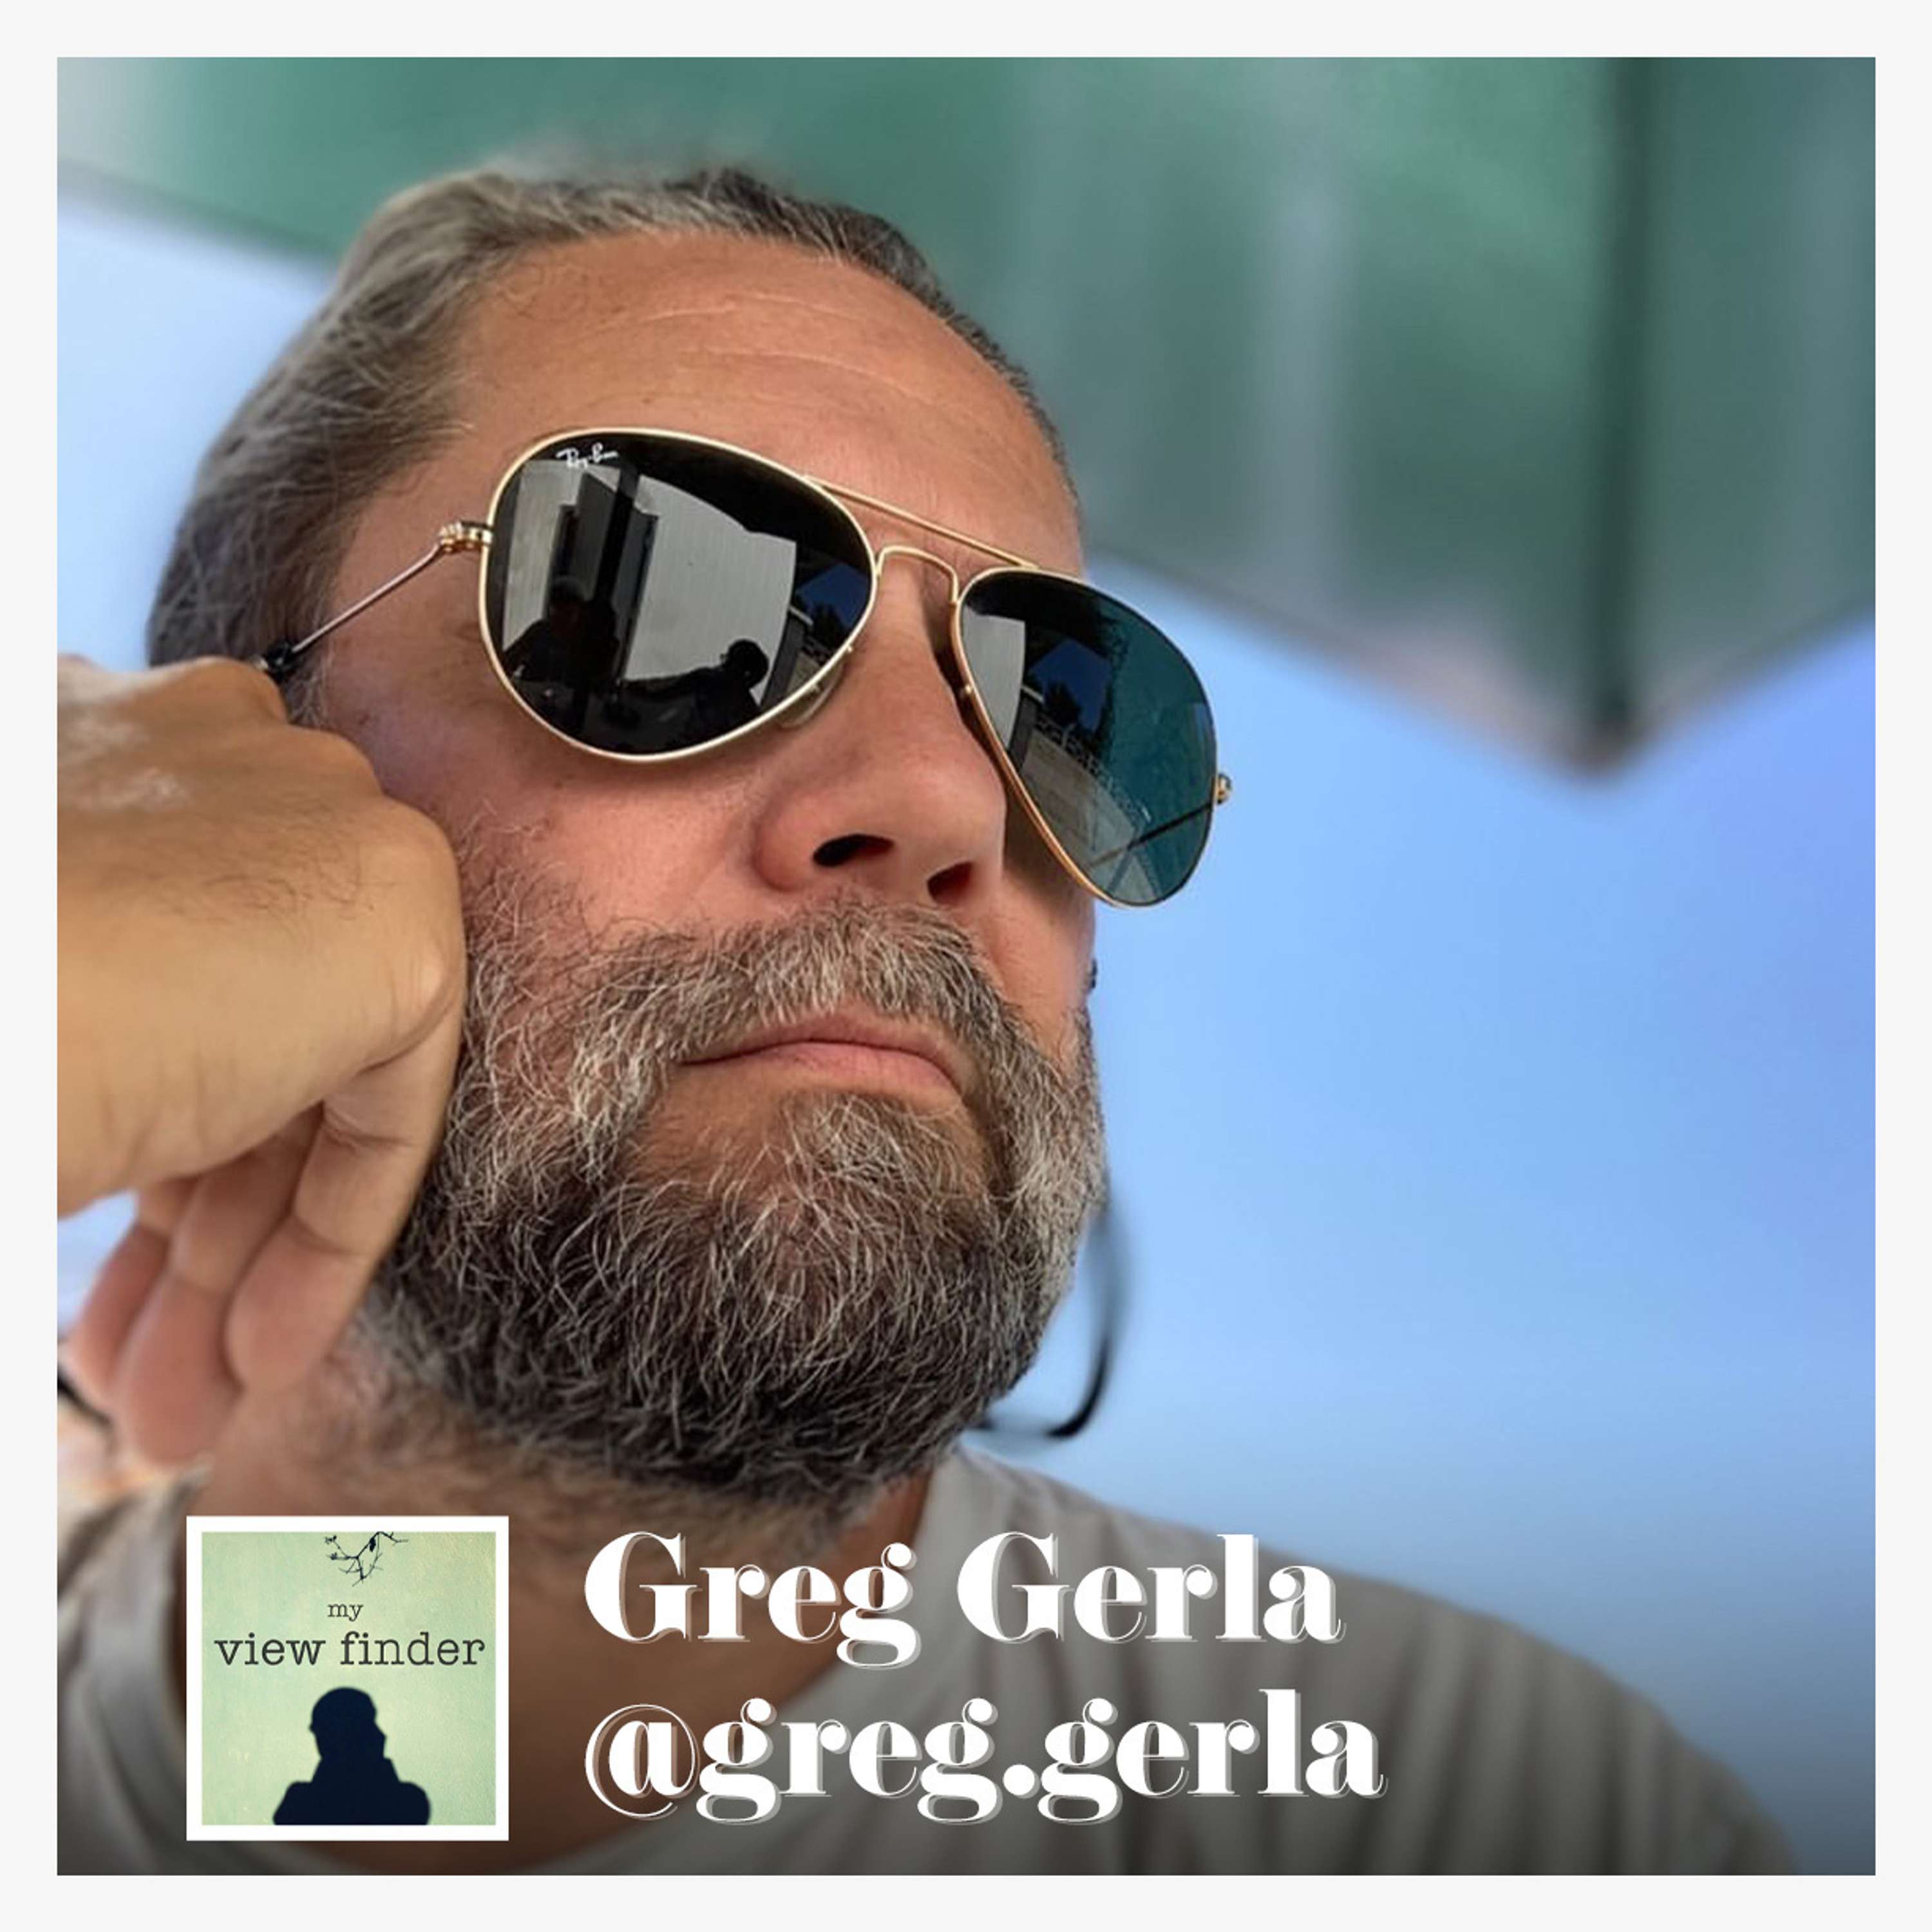 Greg Gerla - Balance and Moderation in Photography - Part 1